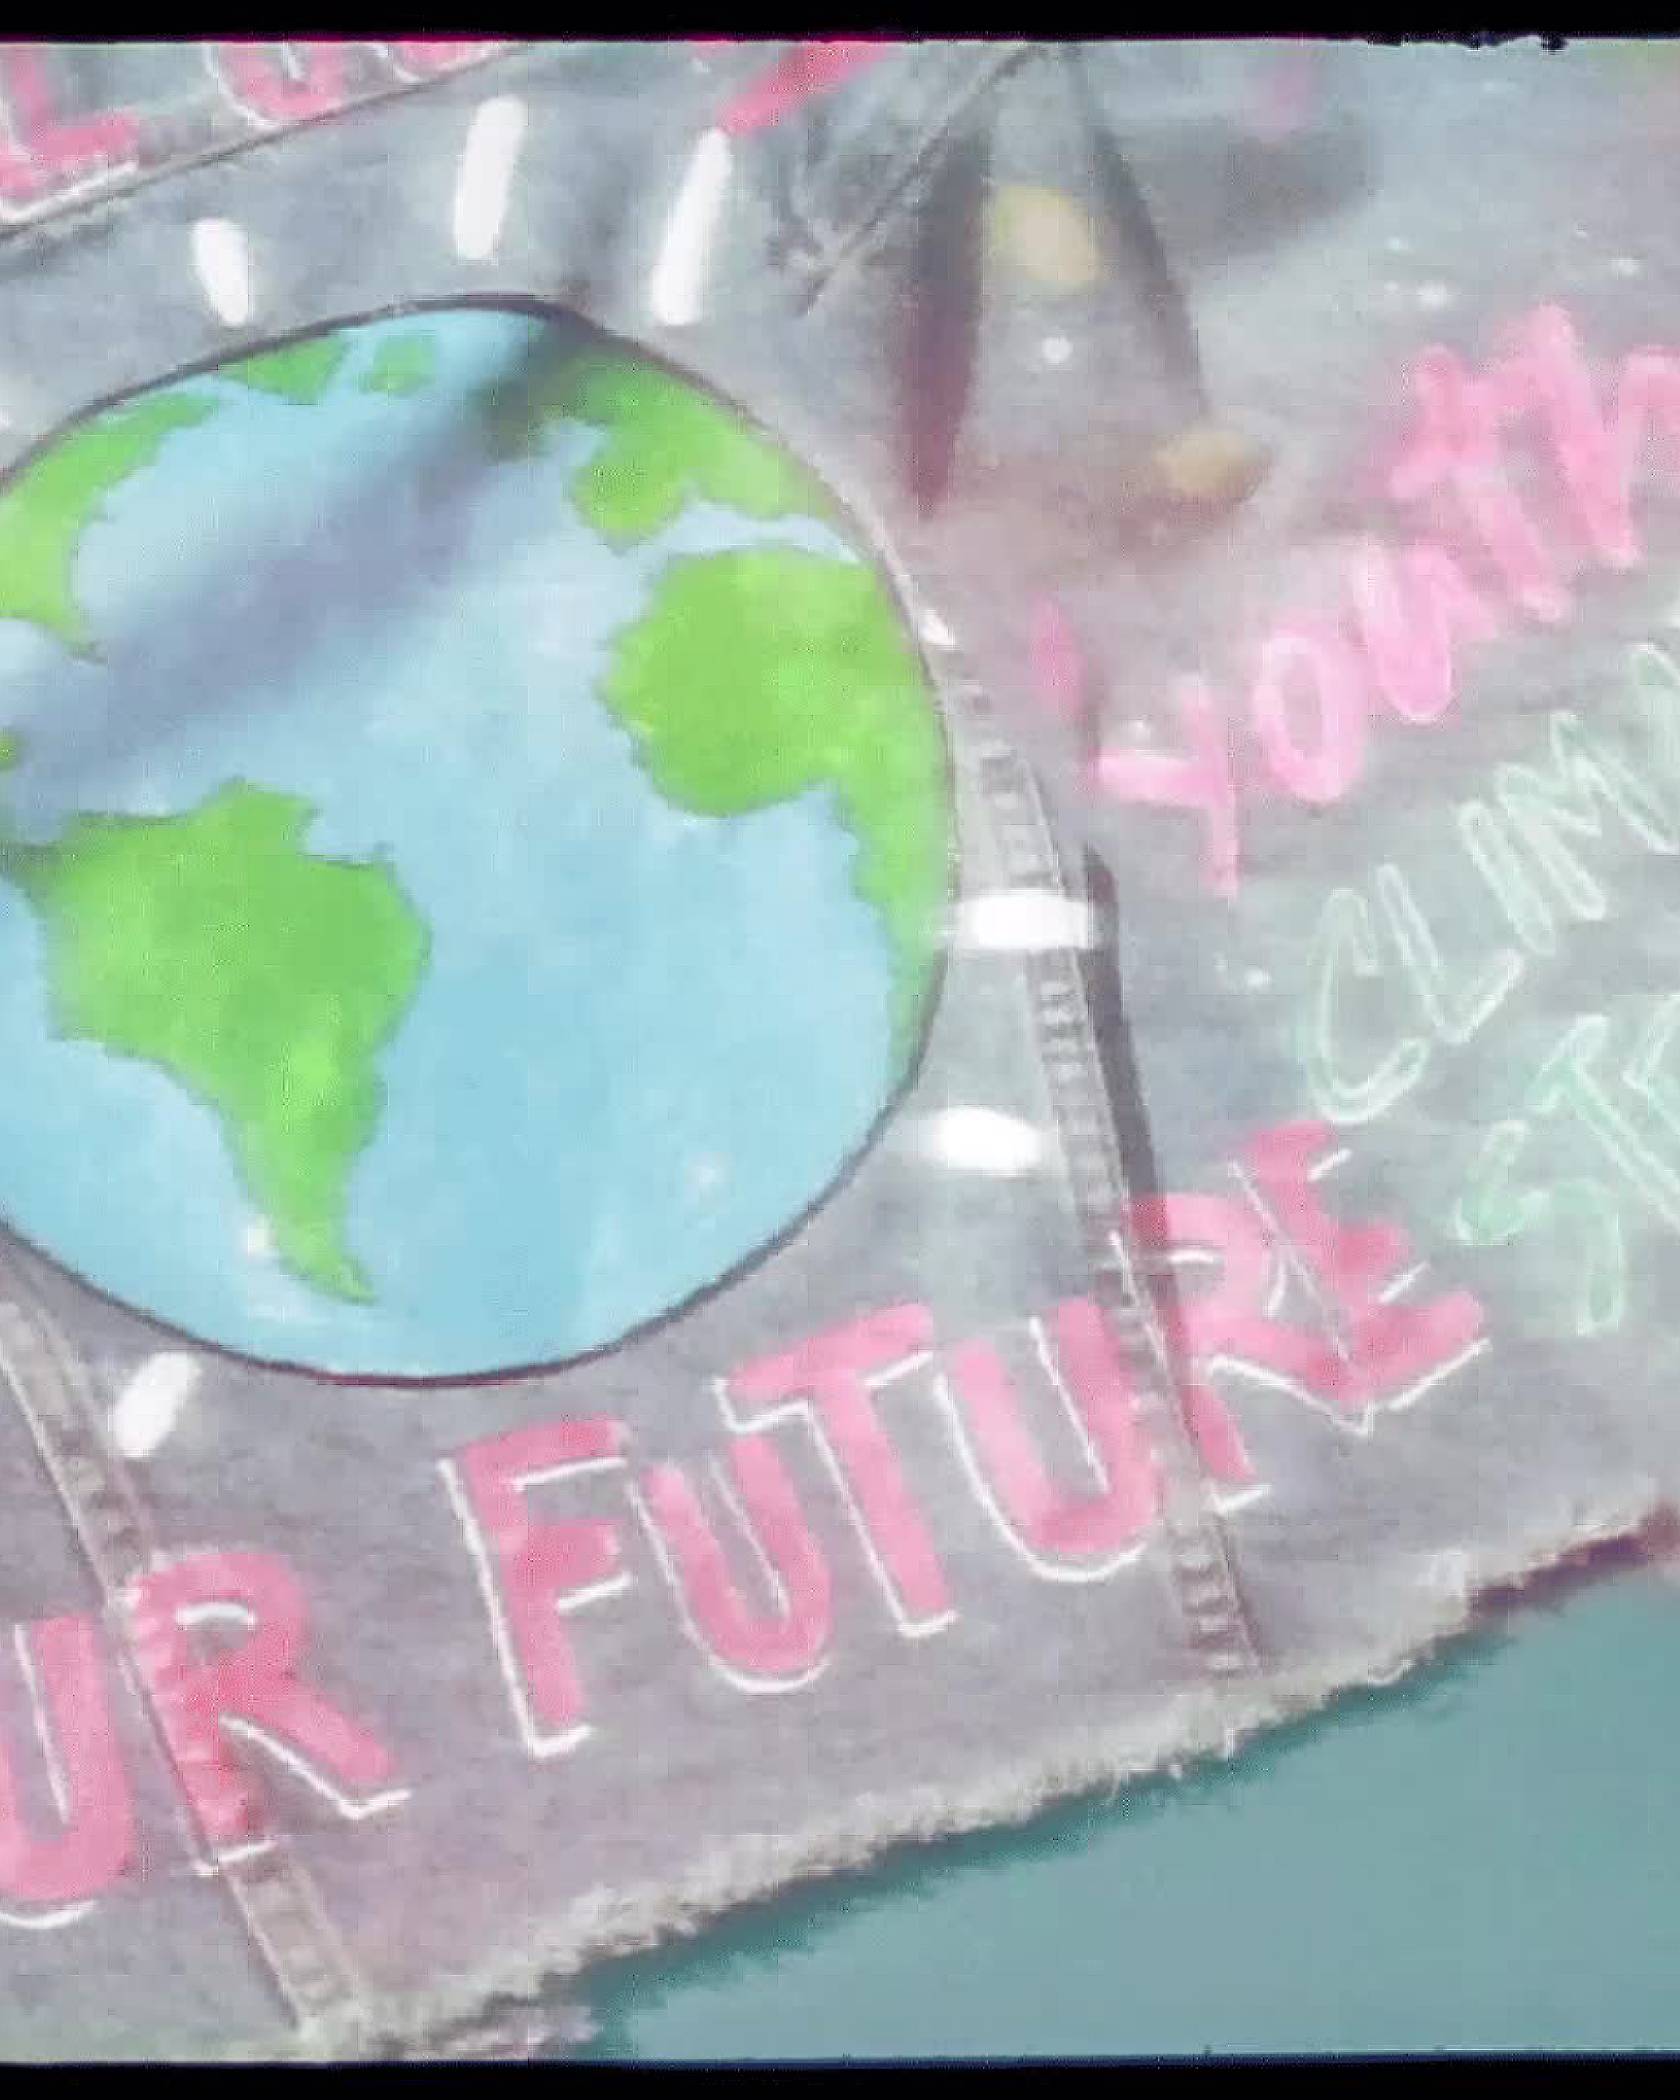 A gif of the back of Xiye's custom Levi's Trucker jacket showing the painted on words, "Climate Justice is Social Justice", "Our Future", and "Youth Climate Strike" additionally the back of the jacket features a painting of the globe.